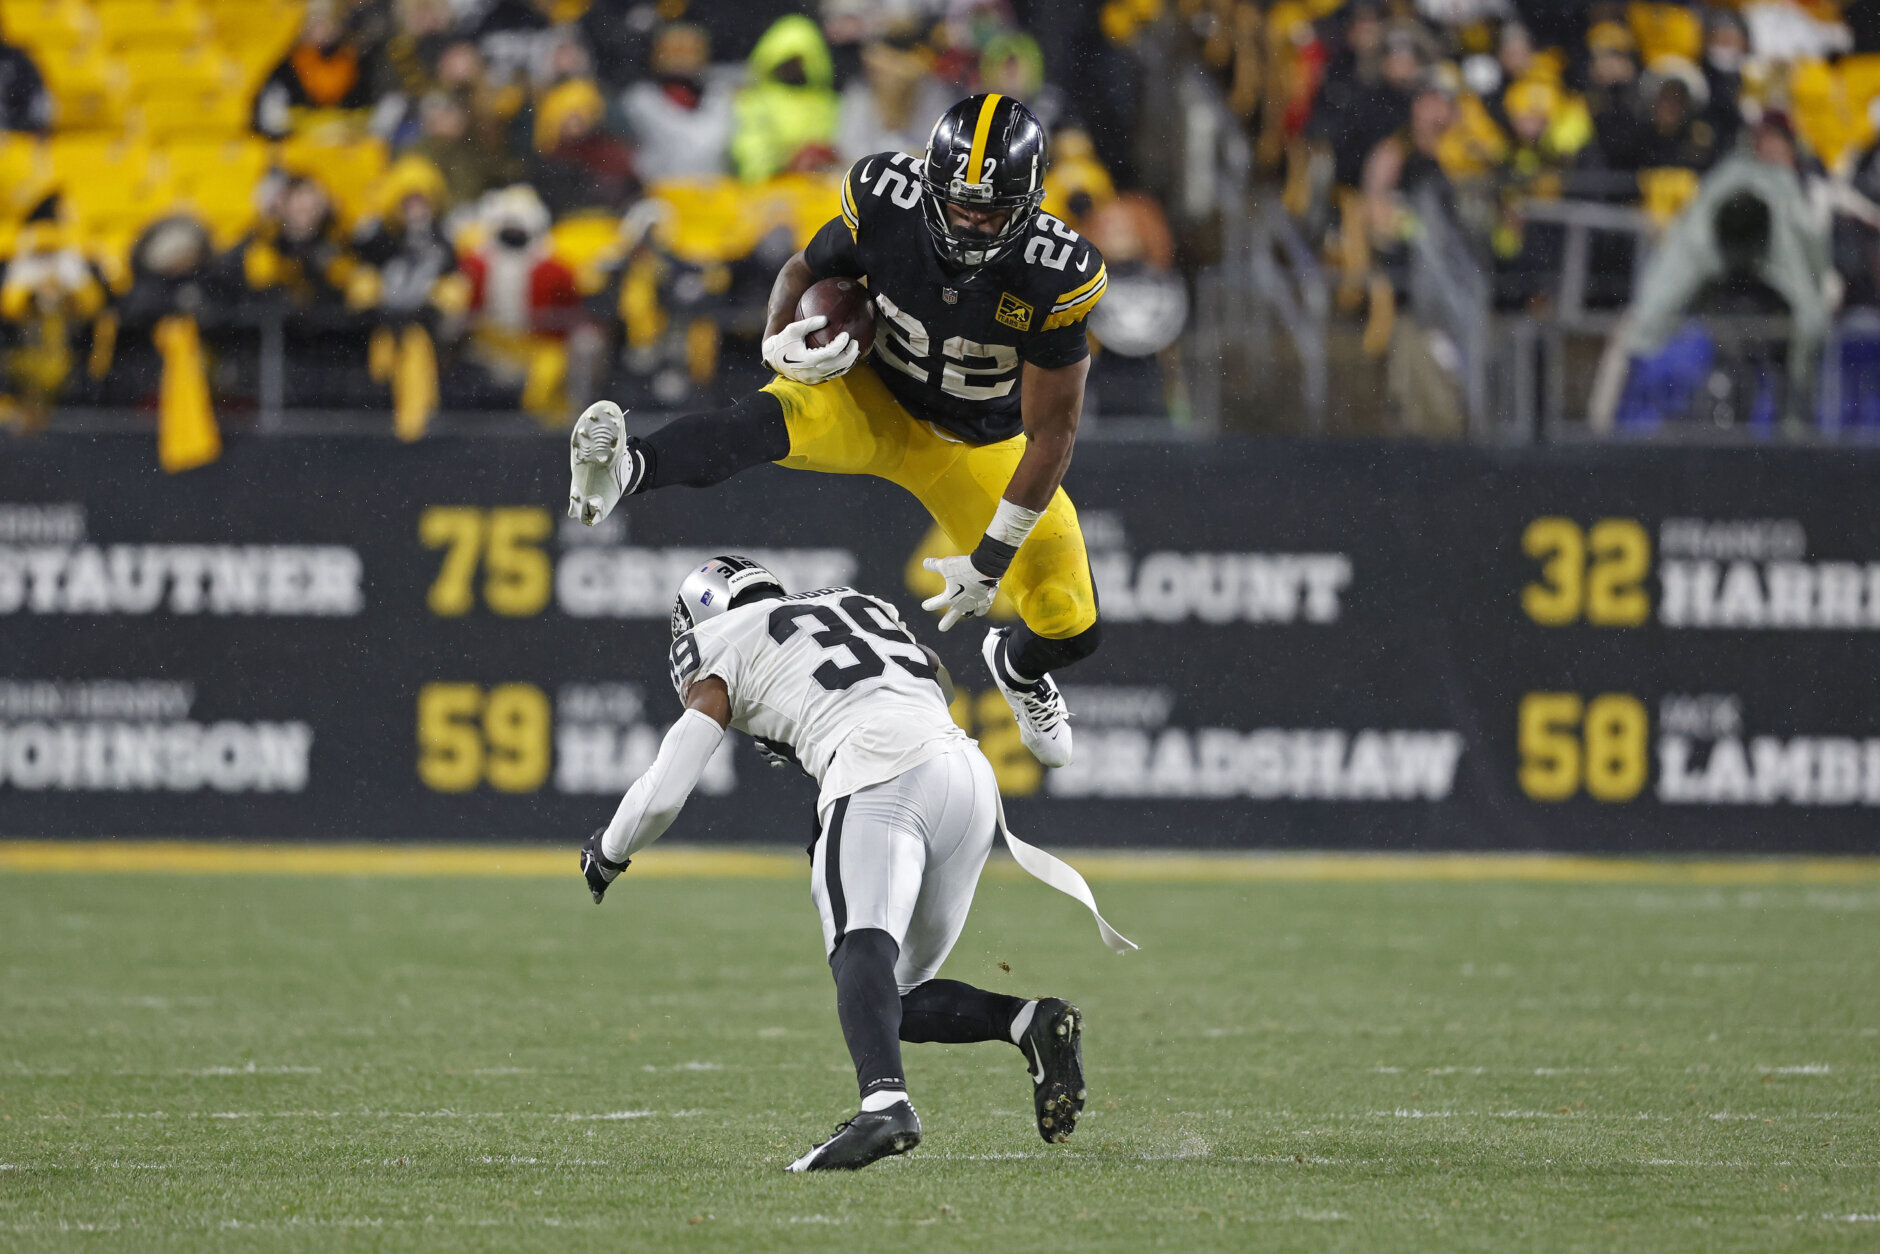 <p><em><strong>Raiders 10</strong></em><br />
<em><strong>Steelers 13</strong></em></p>
<p>In a fitting tribute to the late Franco Harris, another Steelers back named Harris (Najee) led a 100-yard rushing effort to beat the Raiders in a low-scoring affair capped by a clutch catch. Rest in power, No. 32.</p>
<figure id="attachment_24354222" aria-describedby="caption-attachment-24354222" style="width: 1024px" class="wp-caption aligncenter"><img loading="lazy" class="size-large wp-image-24354222" src="https://wtop.com/wp-content/uploads/2022/12/AP22359221149700-1024x683.jpg" alt="" width="1024" height="683" /><figcaption id="caption-attachment-24354222" class="wp-caption-text">A video board shows Number 32 for Pittsburgh Steelers Pro Football Hall of Famer Franco Harris being retired on the 50th Anniversary of the Immaculate Reception during an NFL football game against the Las Vegas Raiders, Sunday, Dec. 24, 2022, in Pittsburgh. (AP Photo/Tyler Kaufman)</figcaption></figure>
